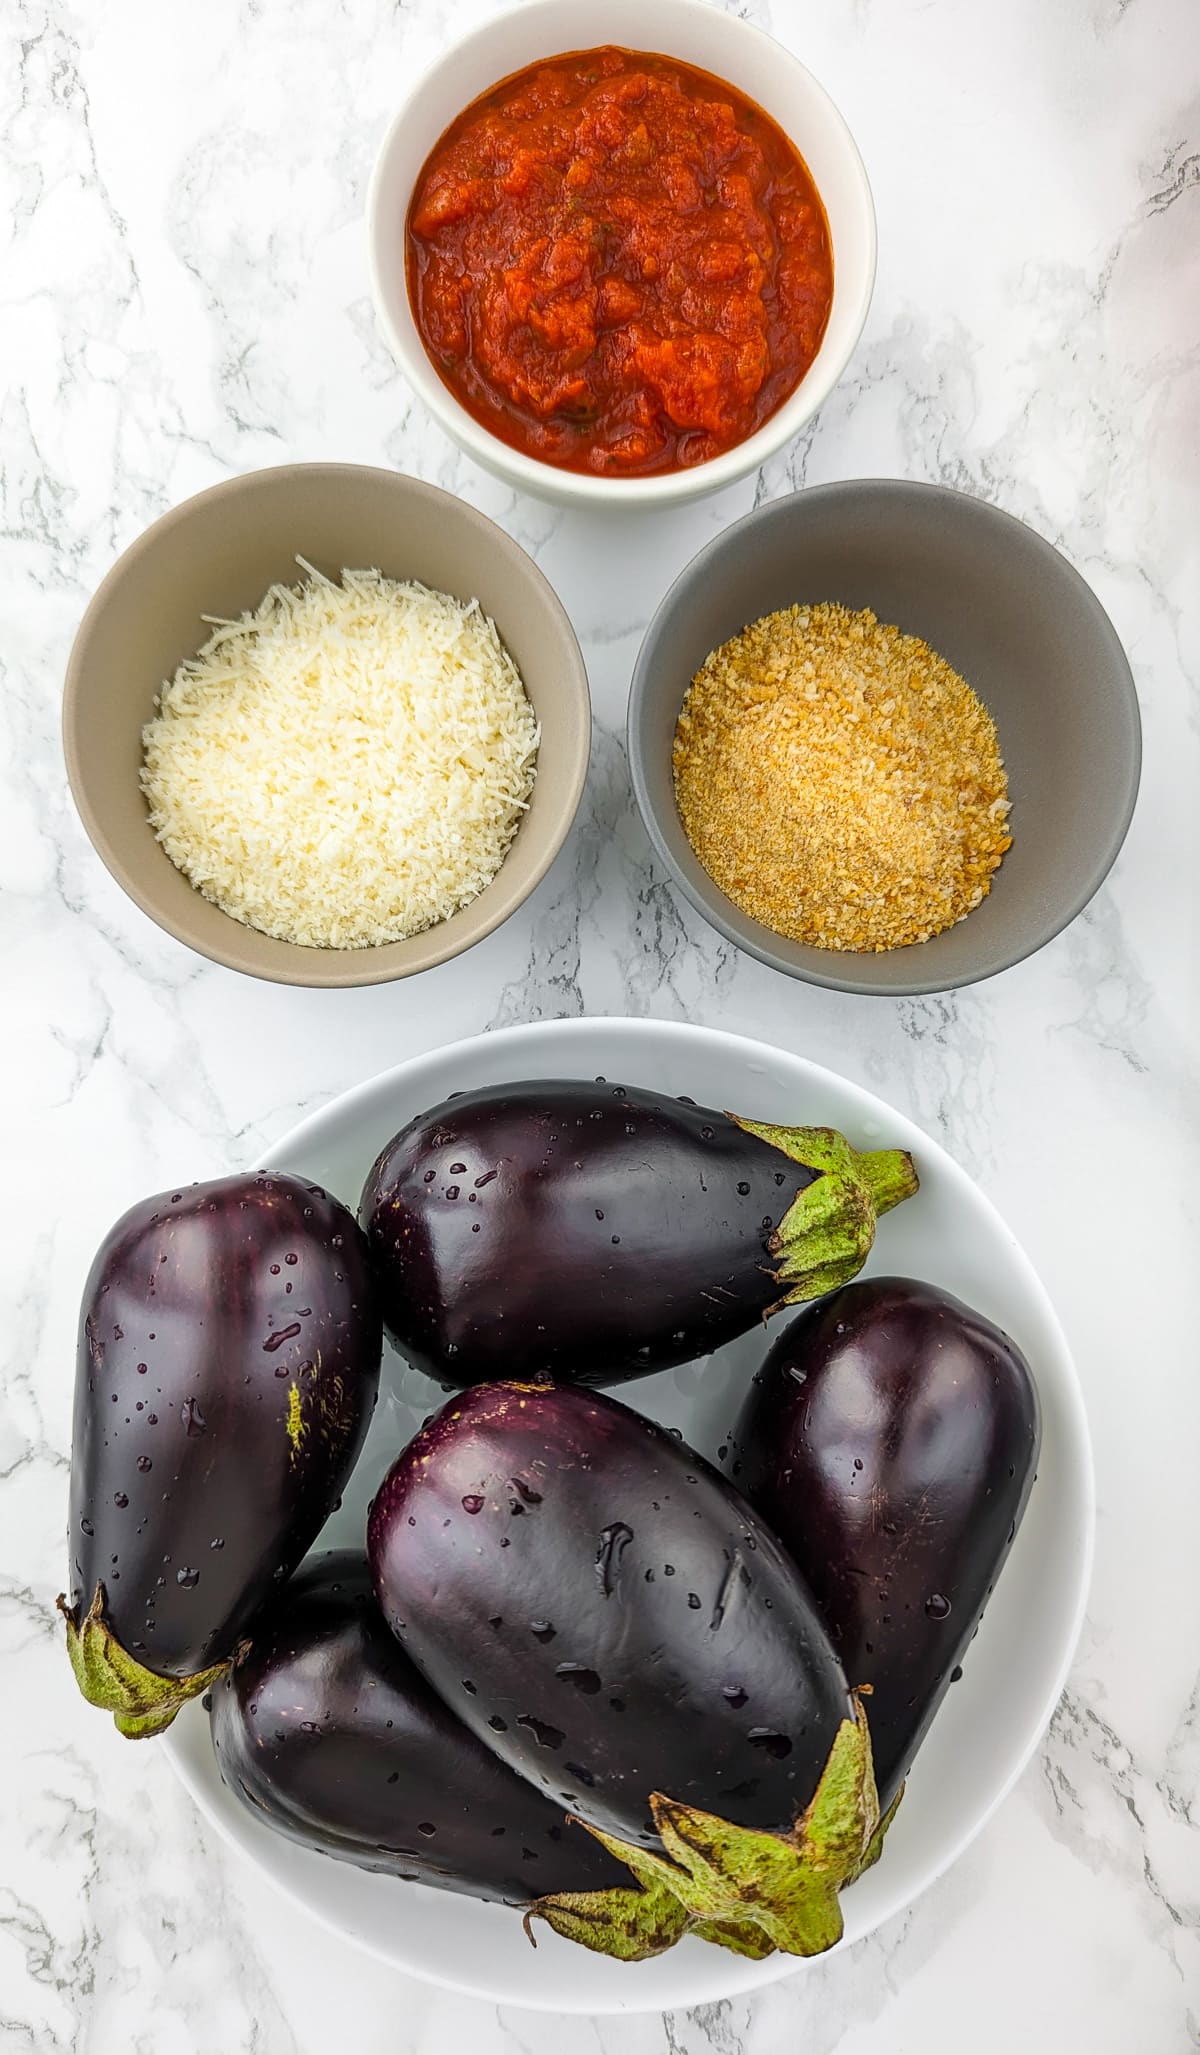 Top view of a plate full with eggplants, breadcrumbs, parmesan and tomato sauce.